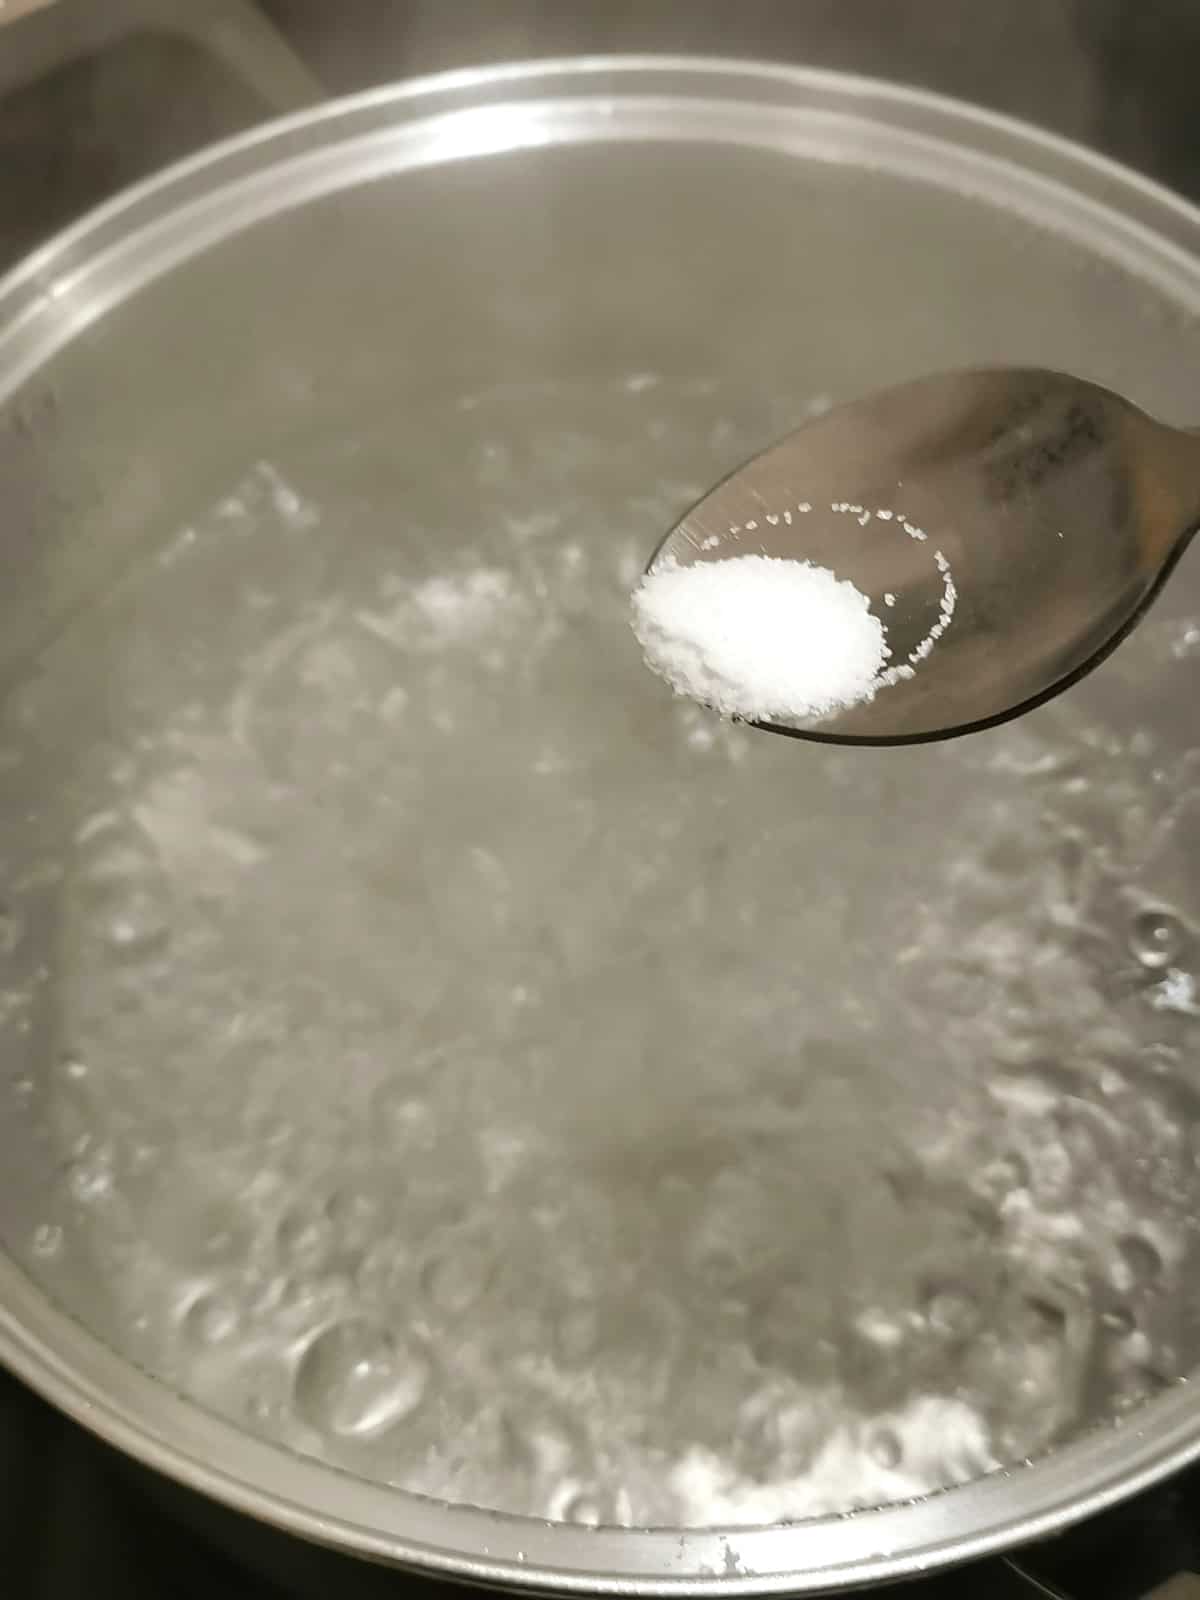 salt added with a teaspoon into rolling boiling water in a large pot on a stove.